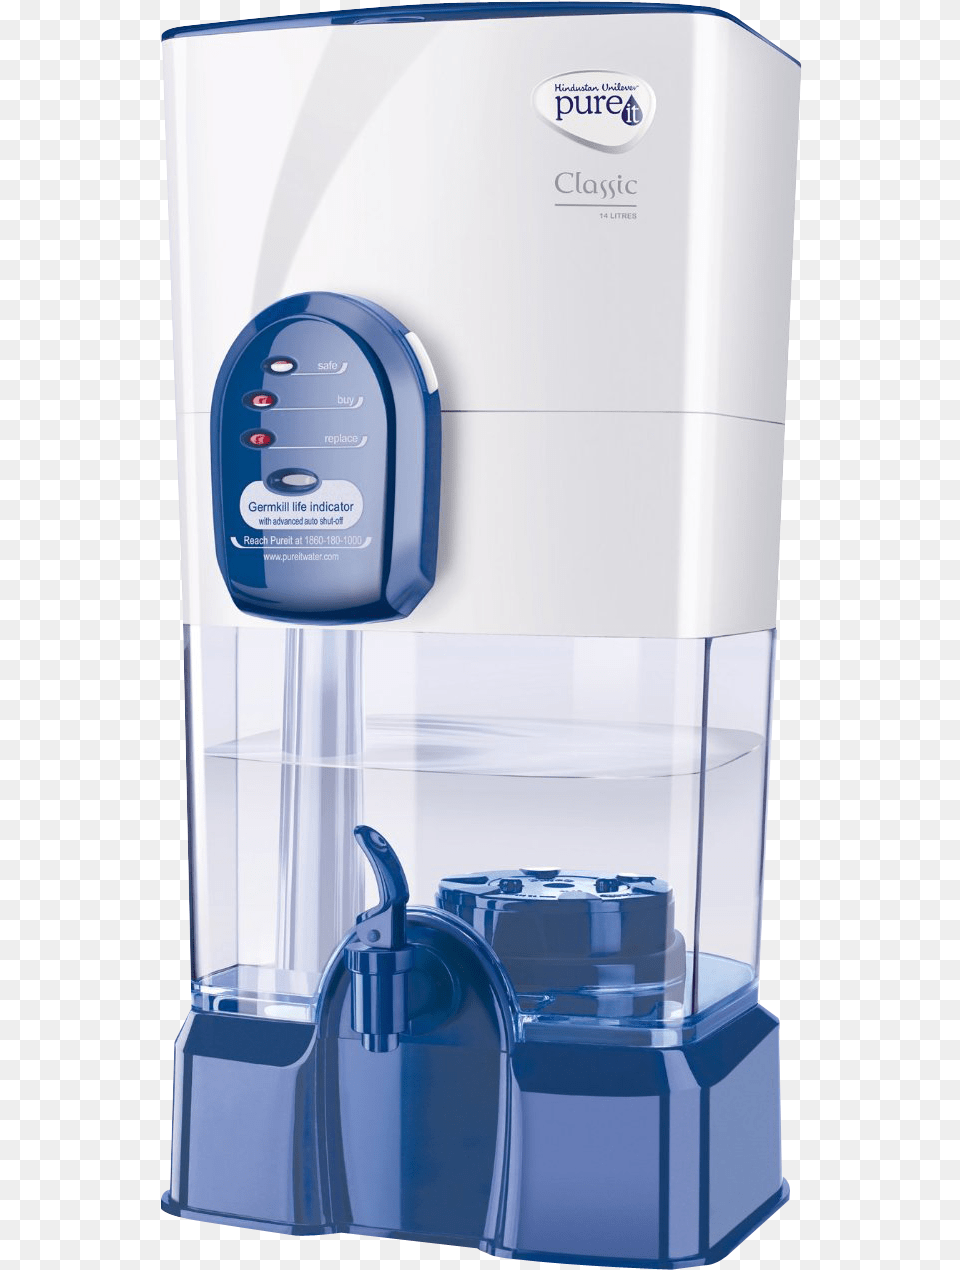 New Water Purifier Ro 14 Litre Pureit Classic, Appliance, Cooler, Device, Electrical Device Png Image